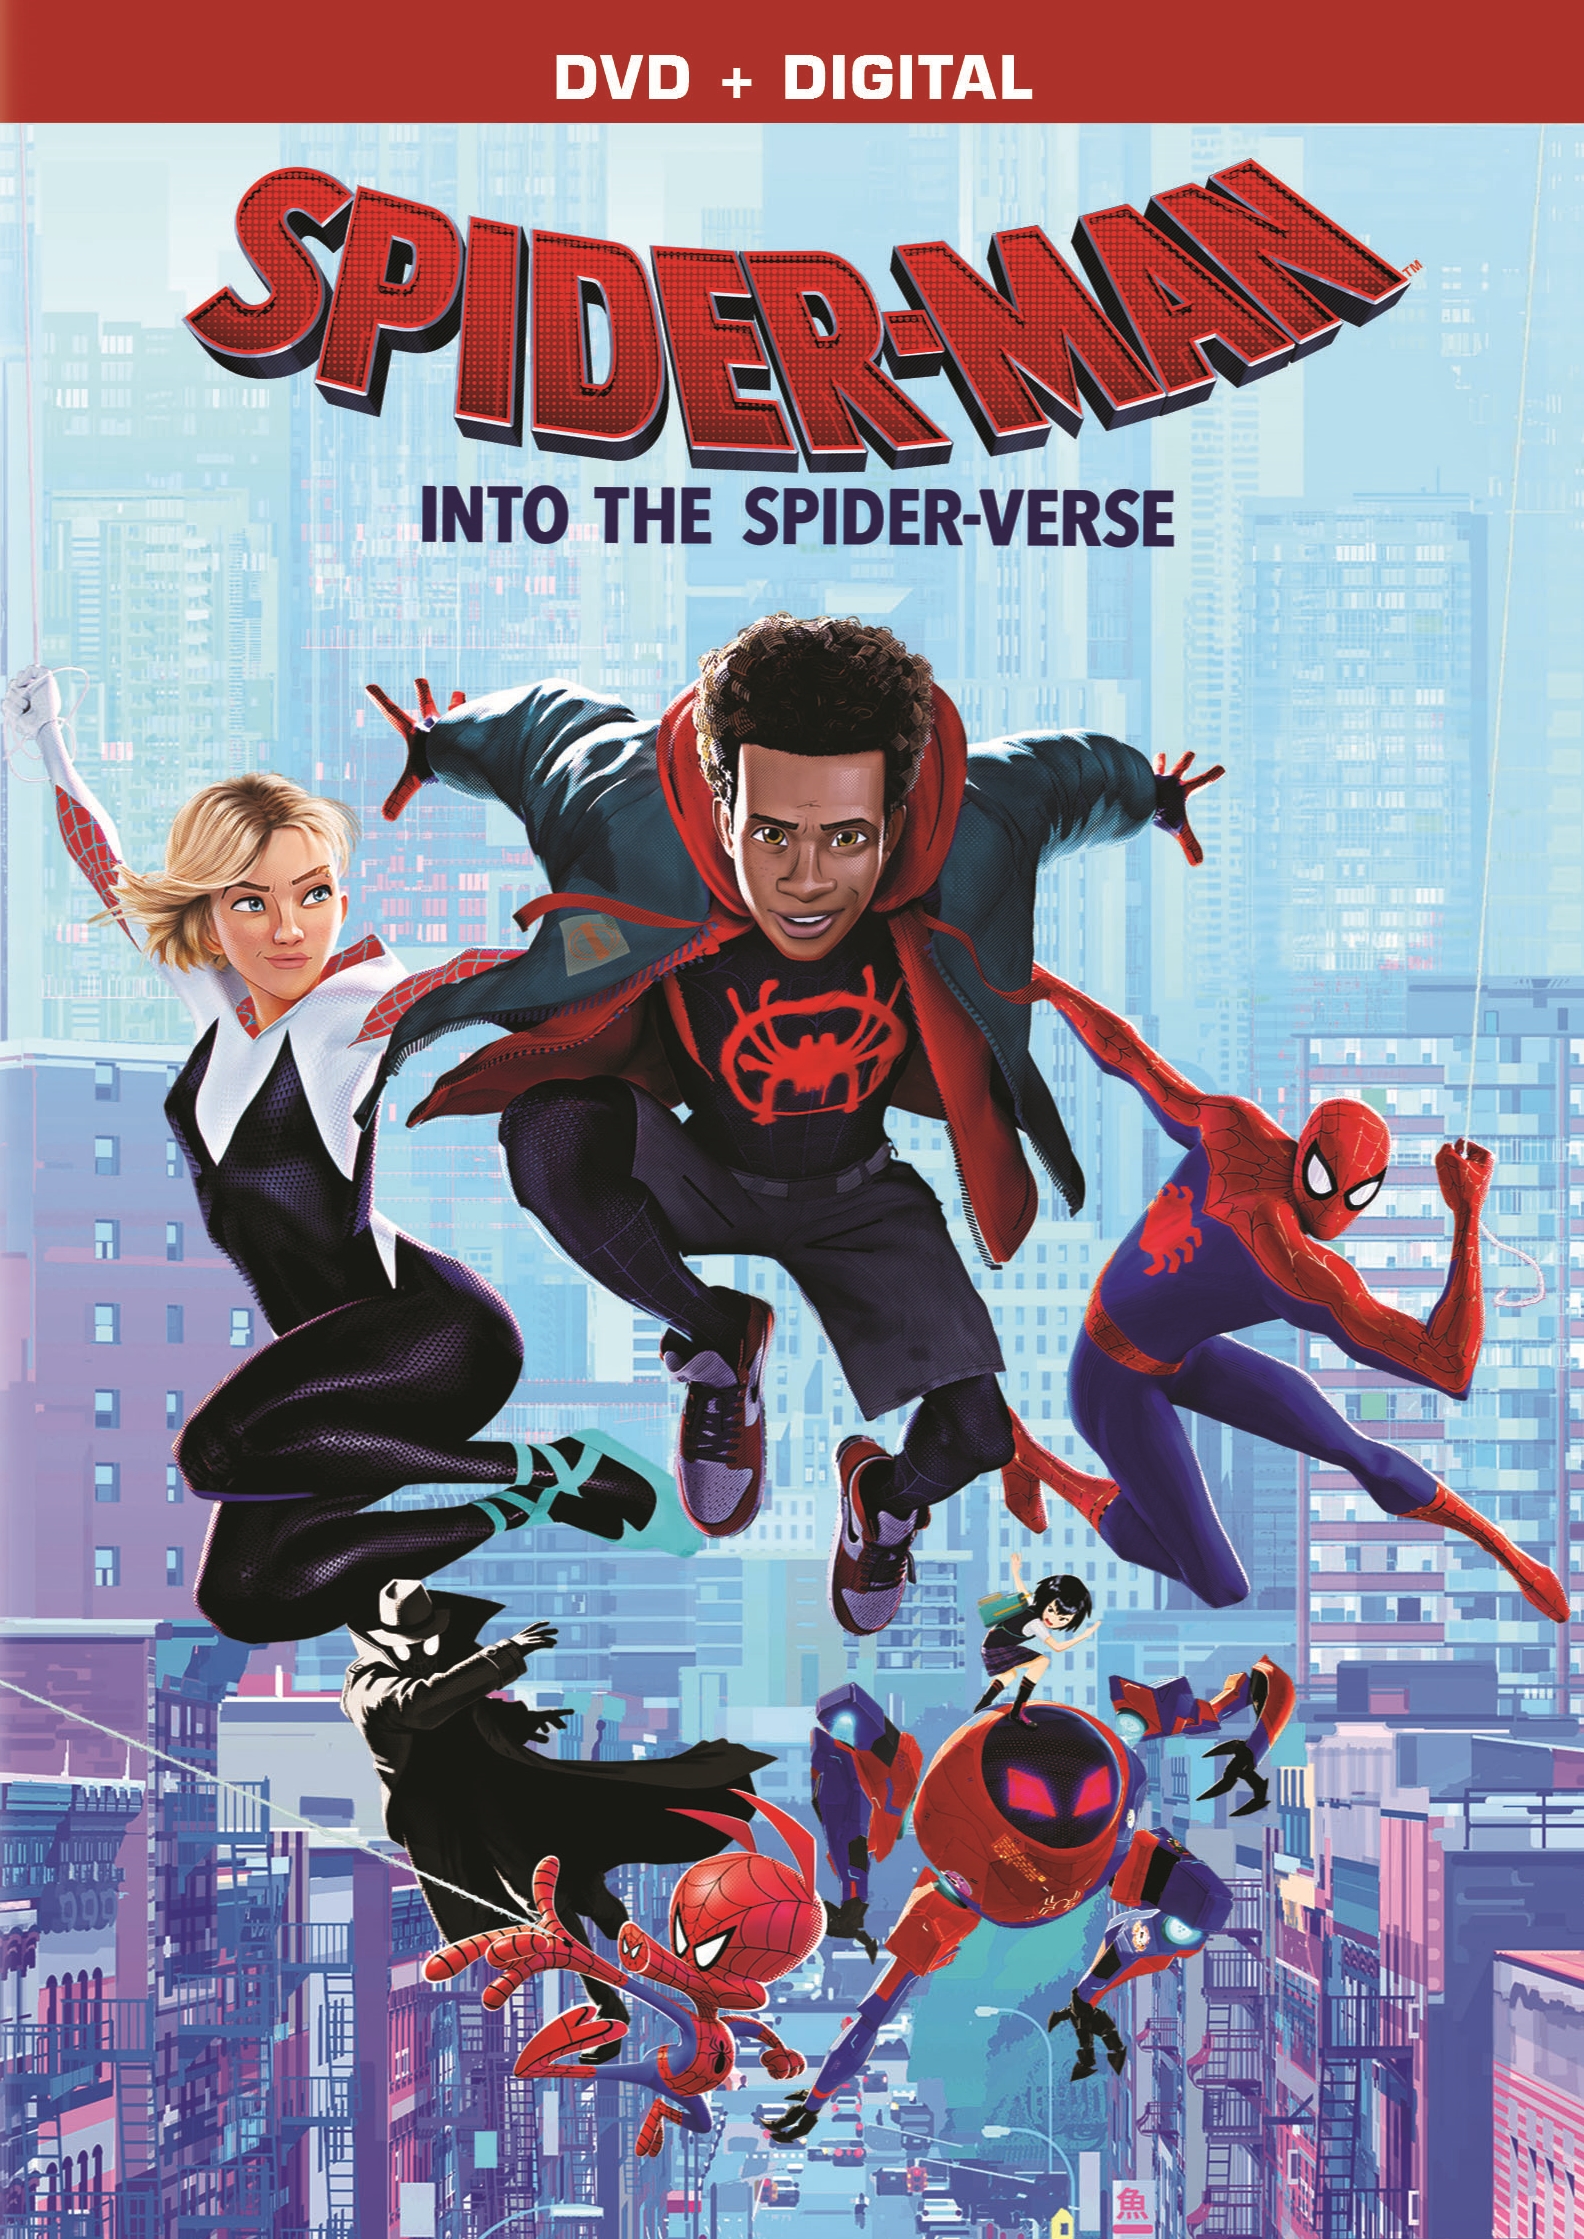 Spider-Man: Into the Spider-Verse [Includes Digital Copy] [DVD] [2018] -  Best Buy